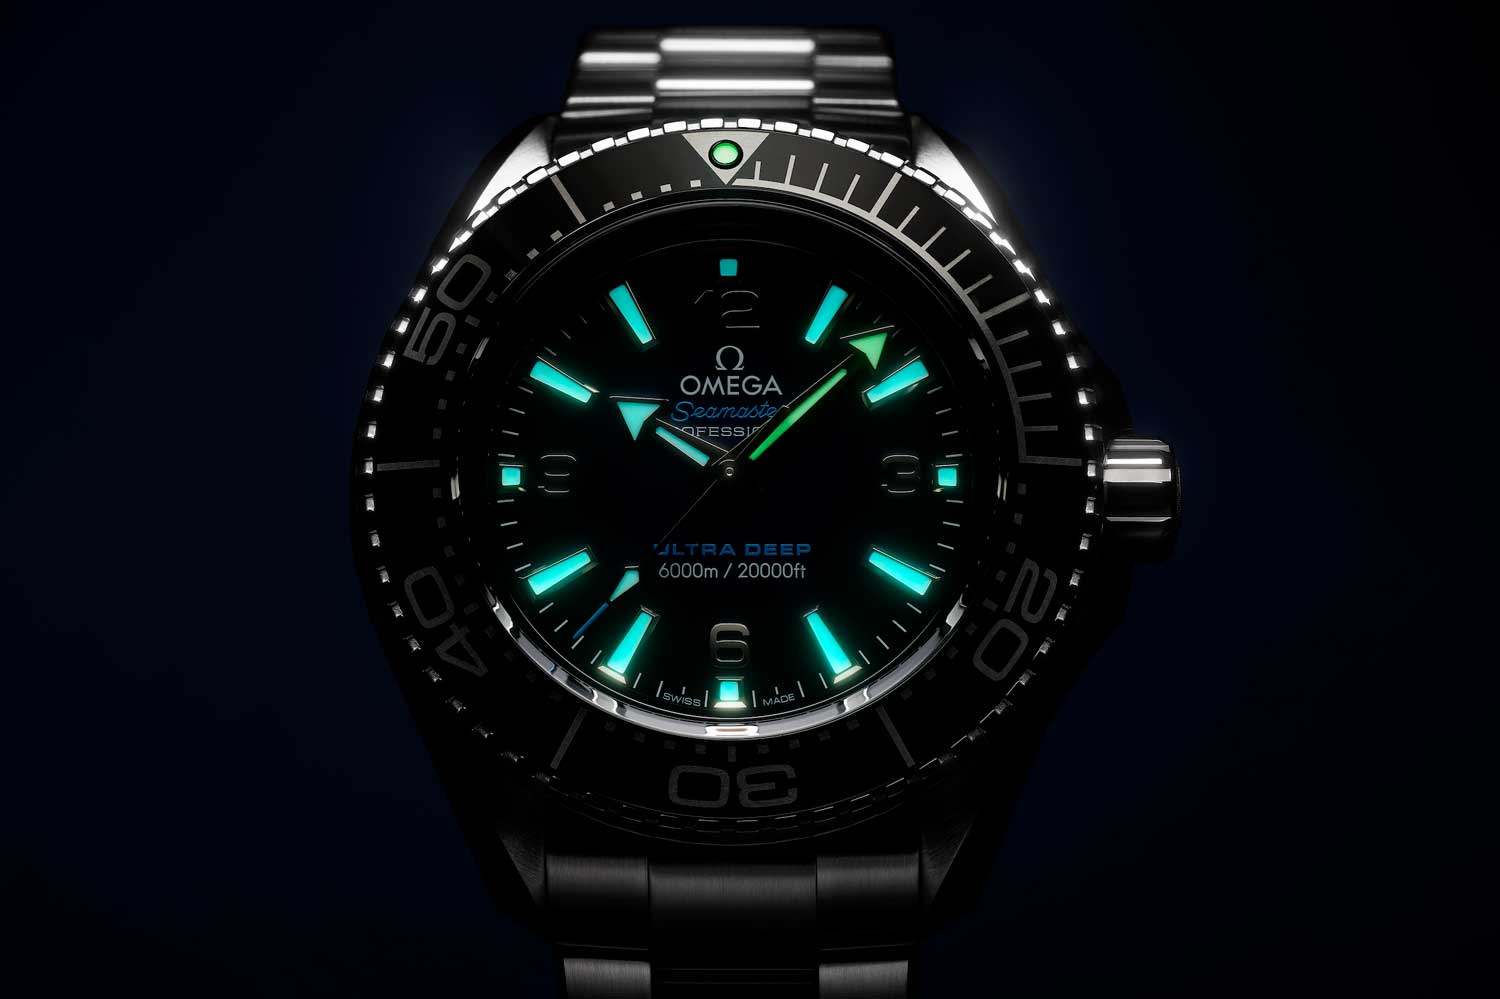 The Super-LumiNova filled minute hand matches the lume pip in the brushed ceramic surface of the bezel. Good for timing decompression stops or cooking eggs. (Image: Omega)